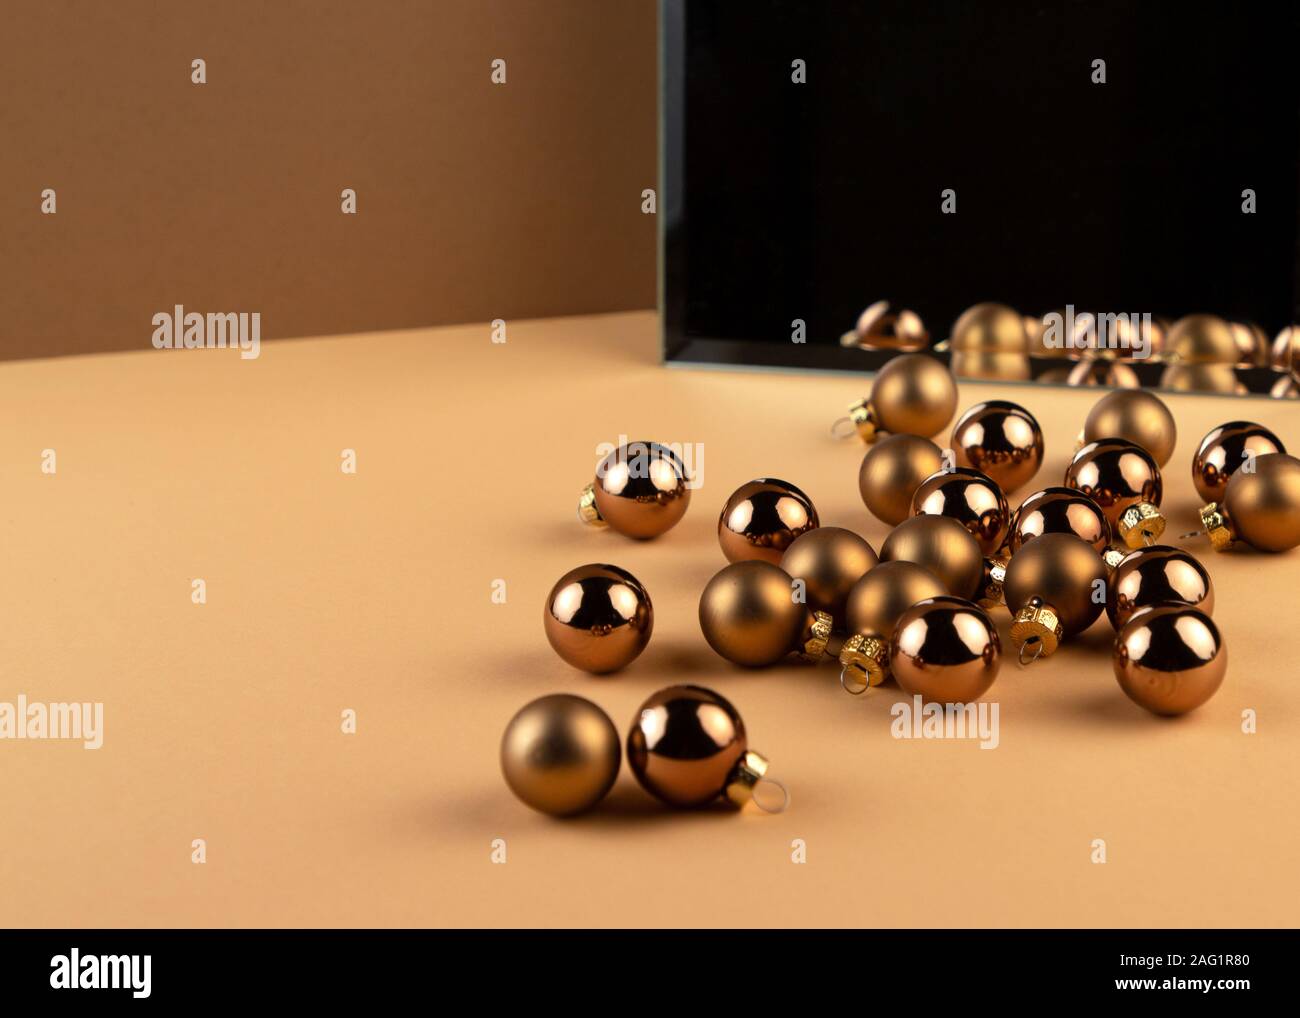 Reflection of group of christmas balls and shadow from balls in a mirror on beige surface. Stock Photo